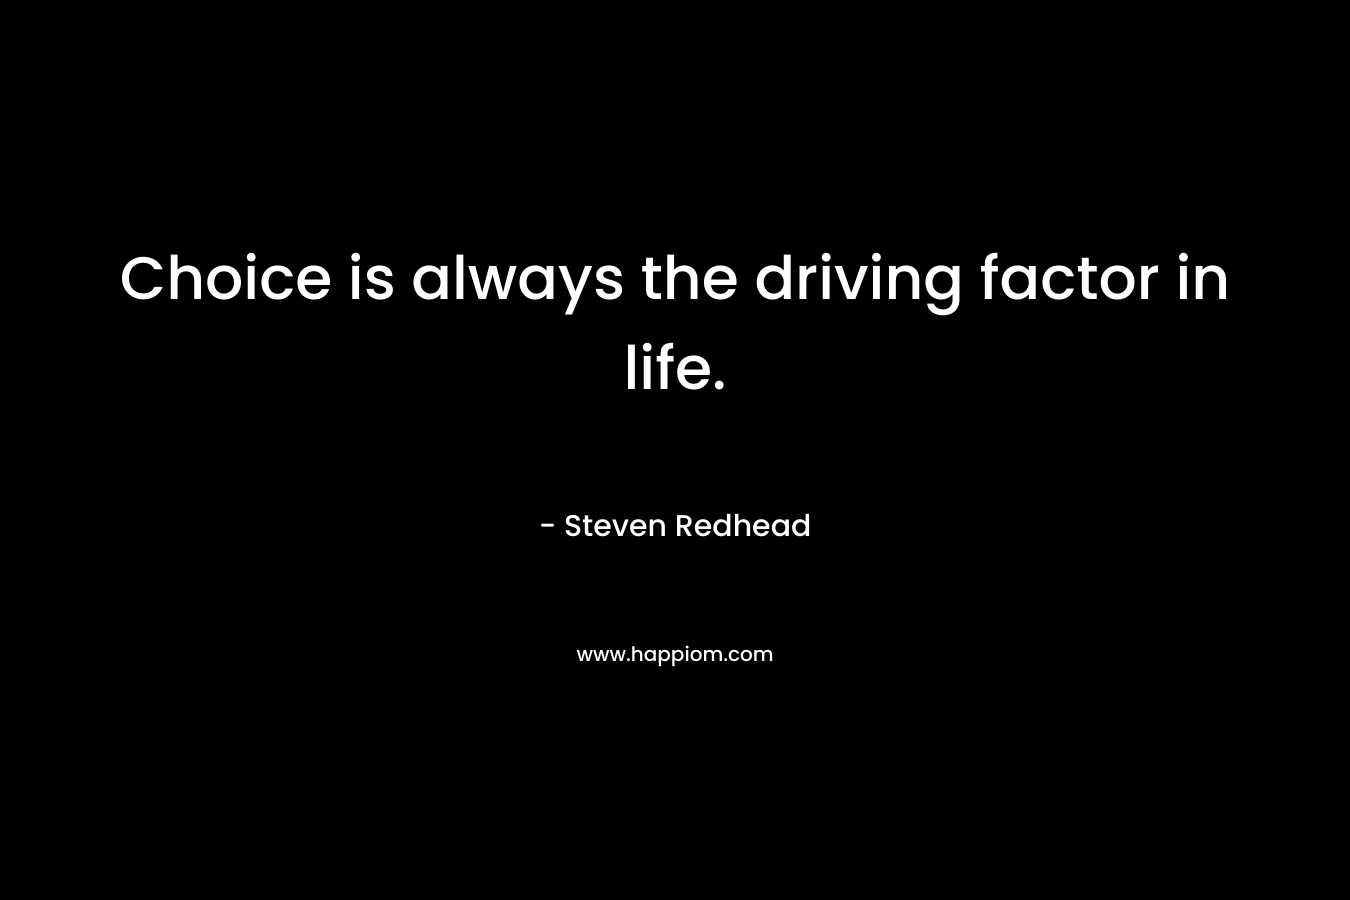 Choice is always the driving factor in life.